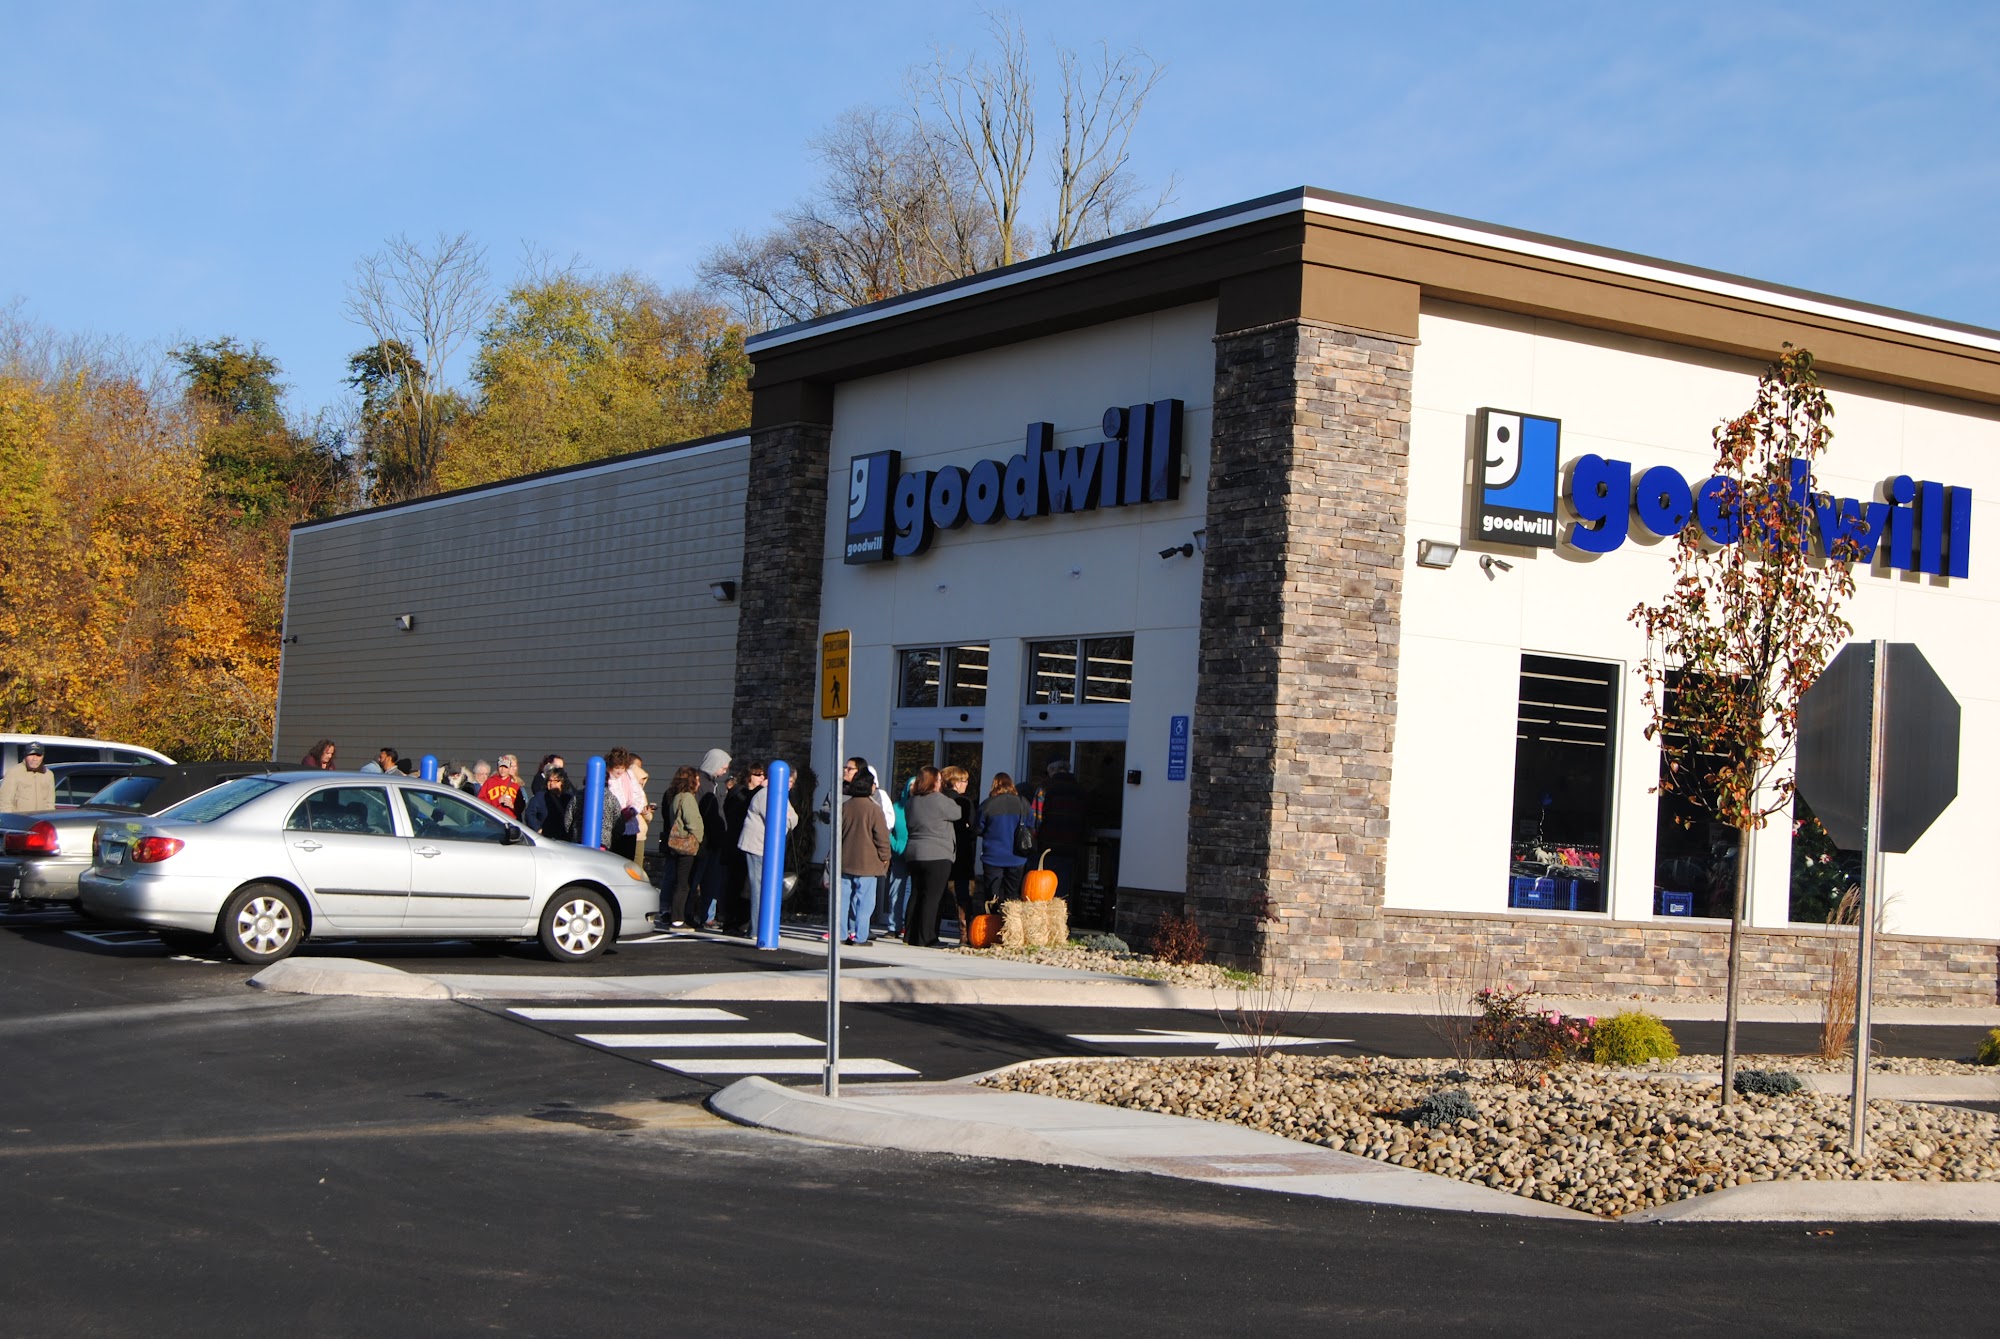 Goodwill Plainville Store and Donation Center